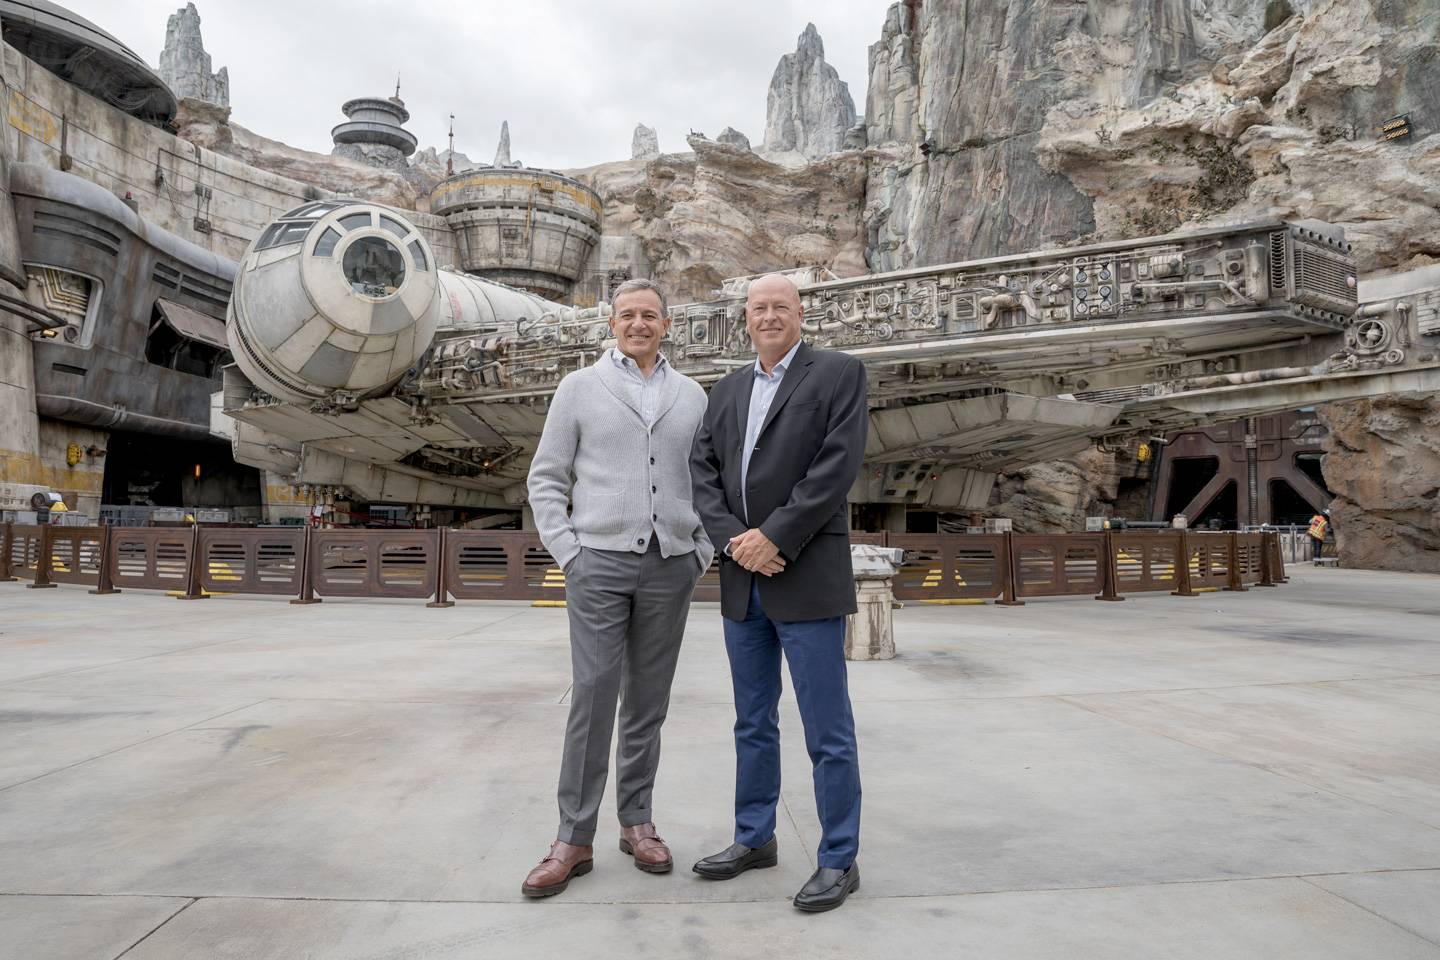 Bob Iger (left) replaced his own successor Bob Chapek (right) as CEO after less than 3 years in the job